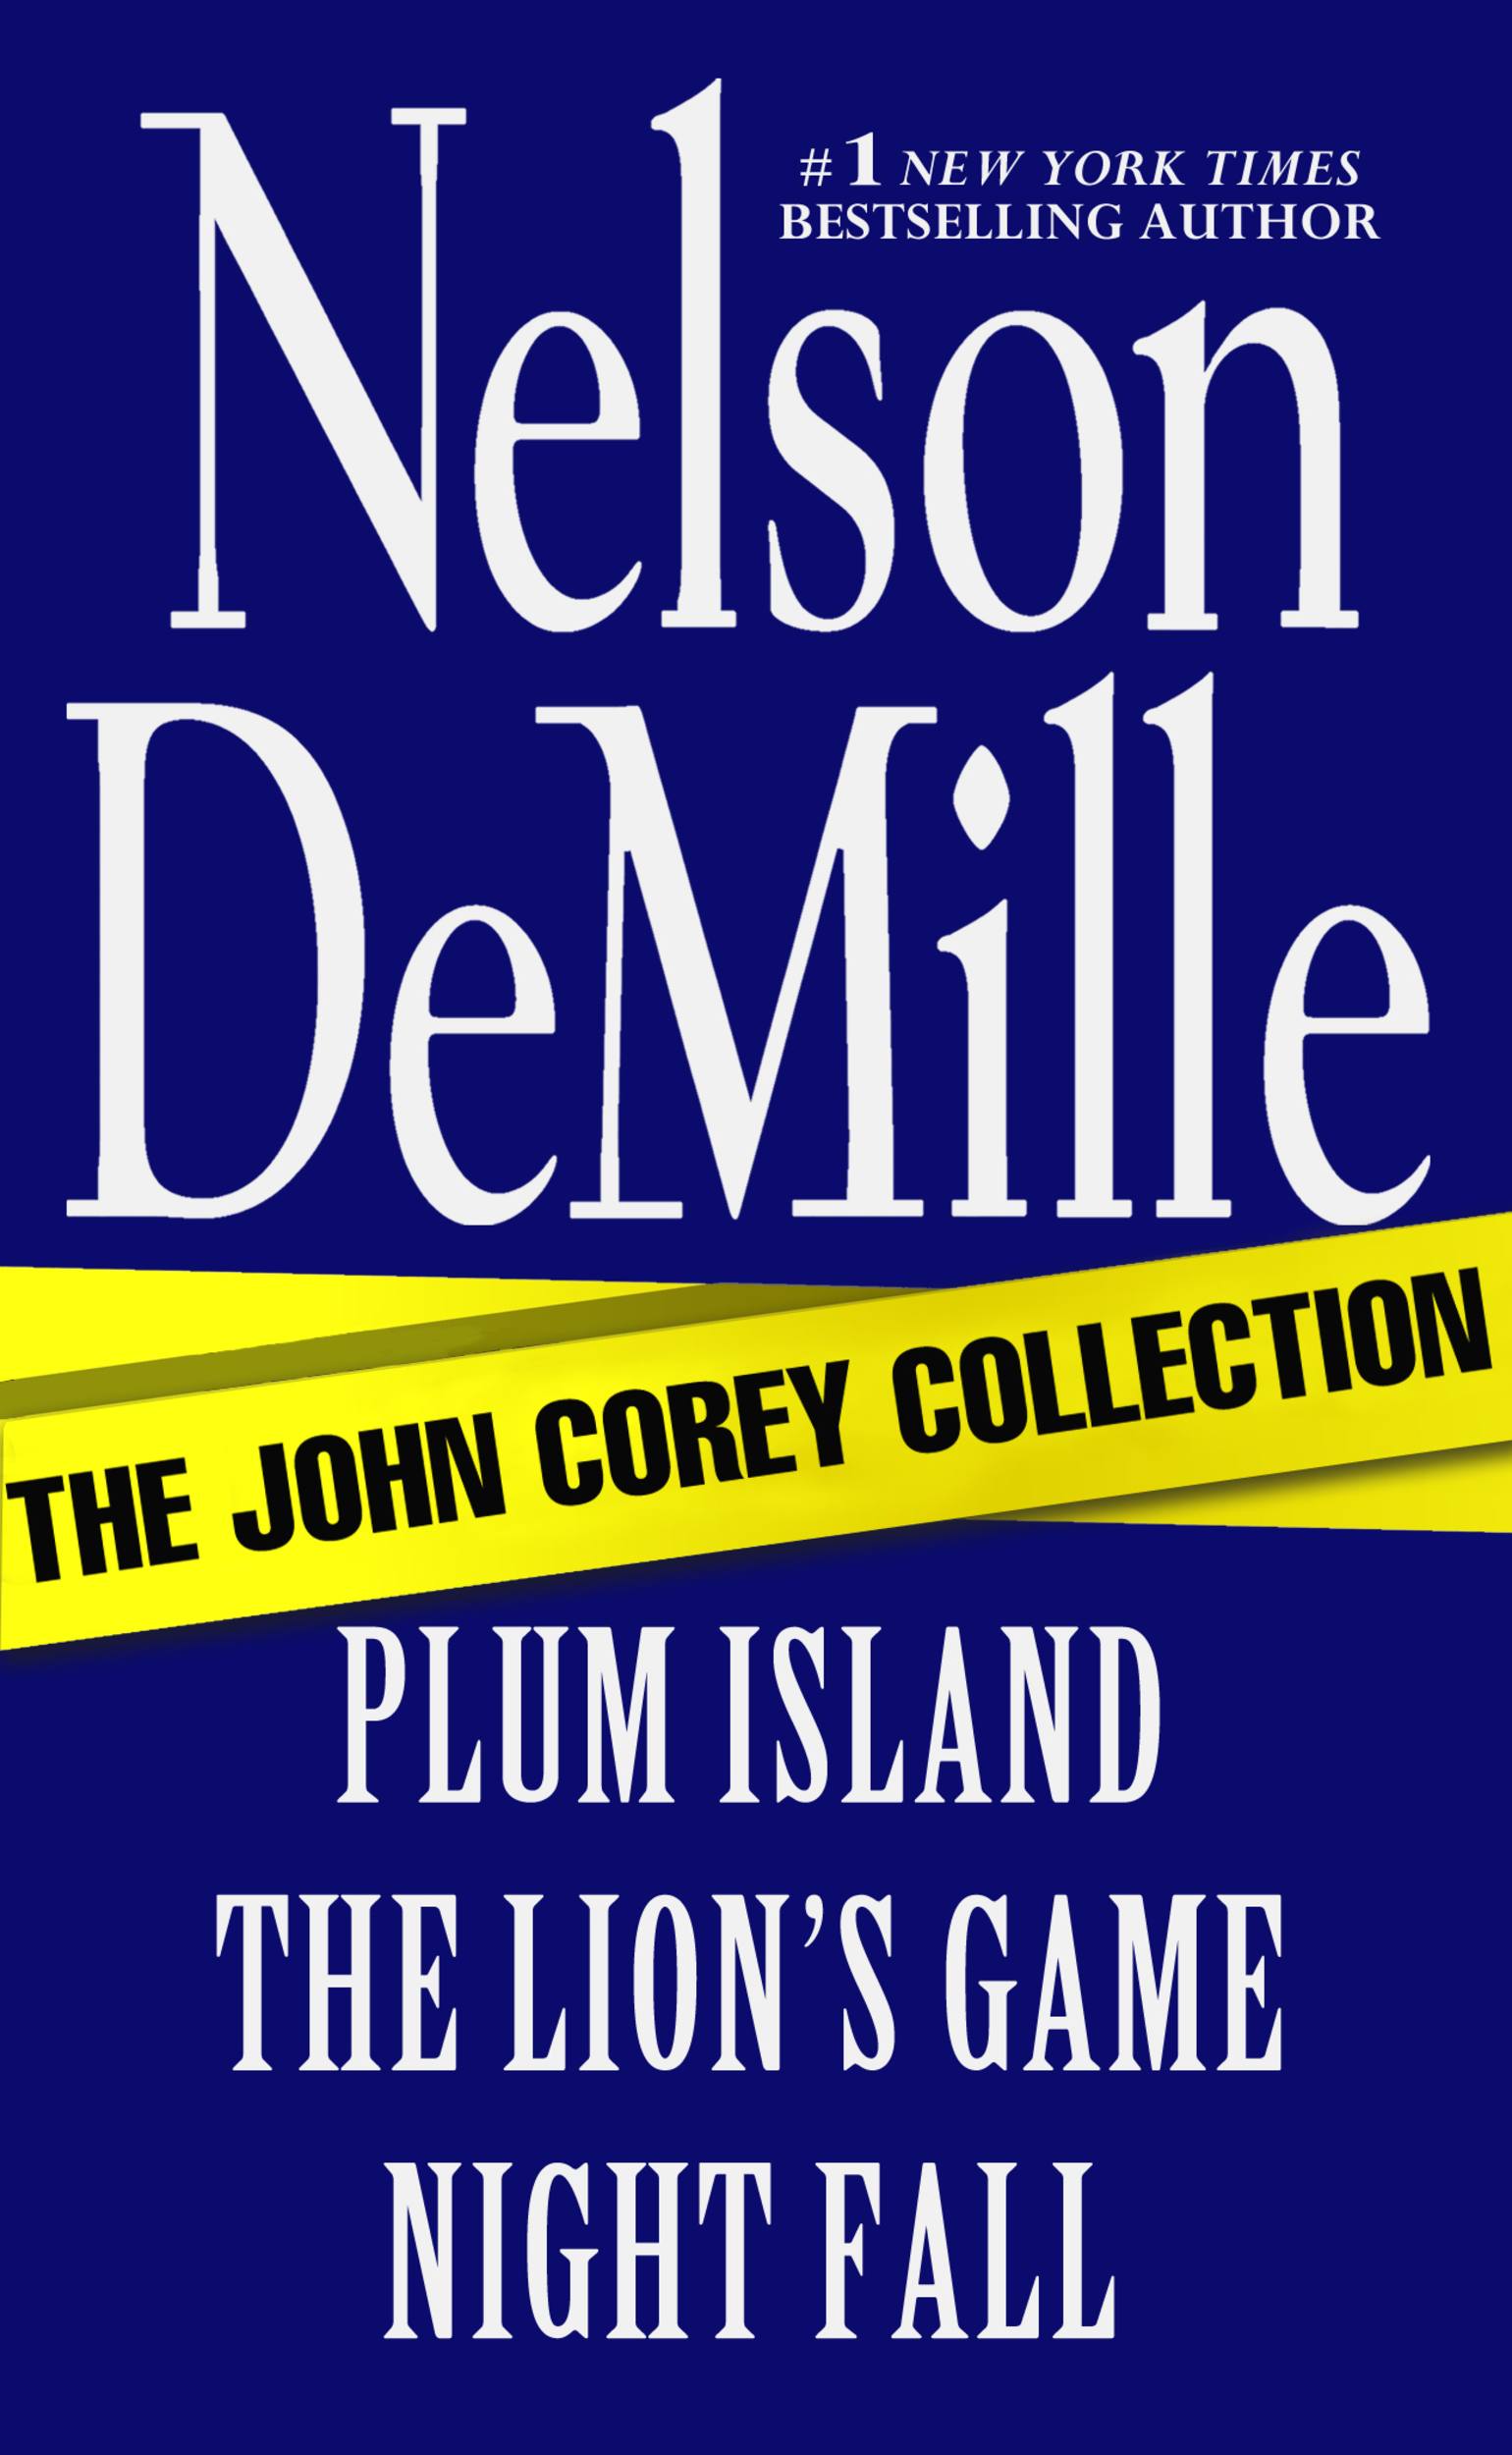 Umschlagbild für The John Corey Collection [electronic resource] : Plum Island, The Lion's Game, and Night Fall Omnibus